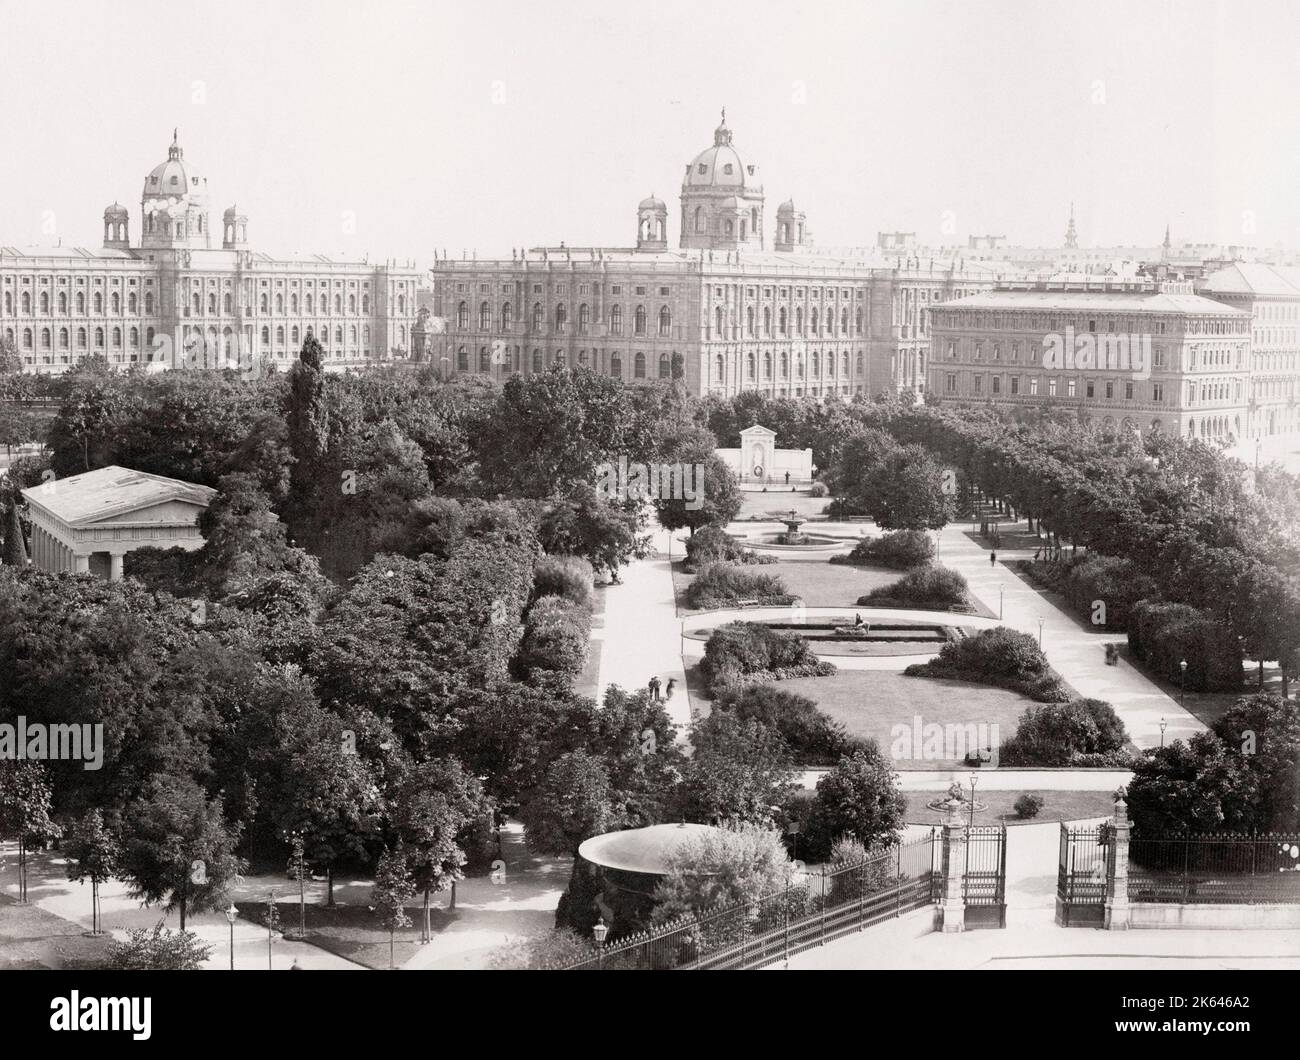 19th century vintage photograph: The Volksgarten is a public park in the Innere Stadt first district of Vienna, Austria. The garden, which is part of the Hofburg Palace, was laid out by Ludwig Remy in 1821. Stock Photo